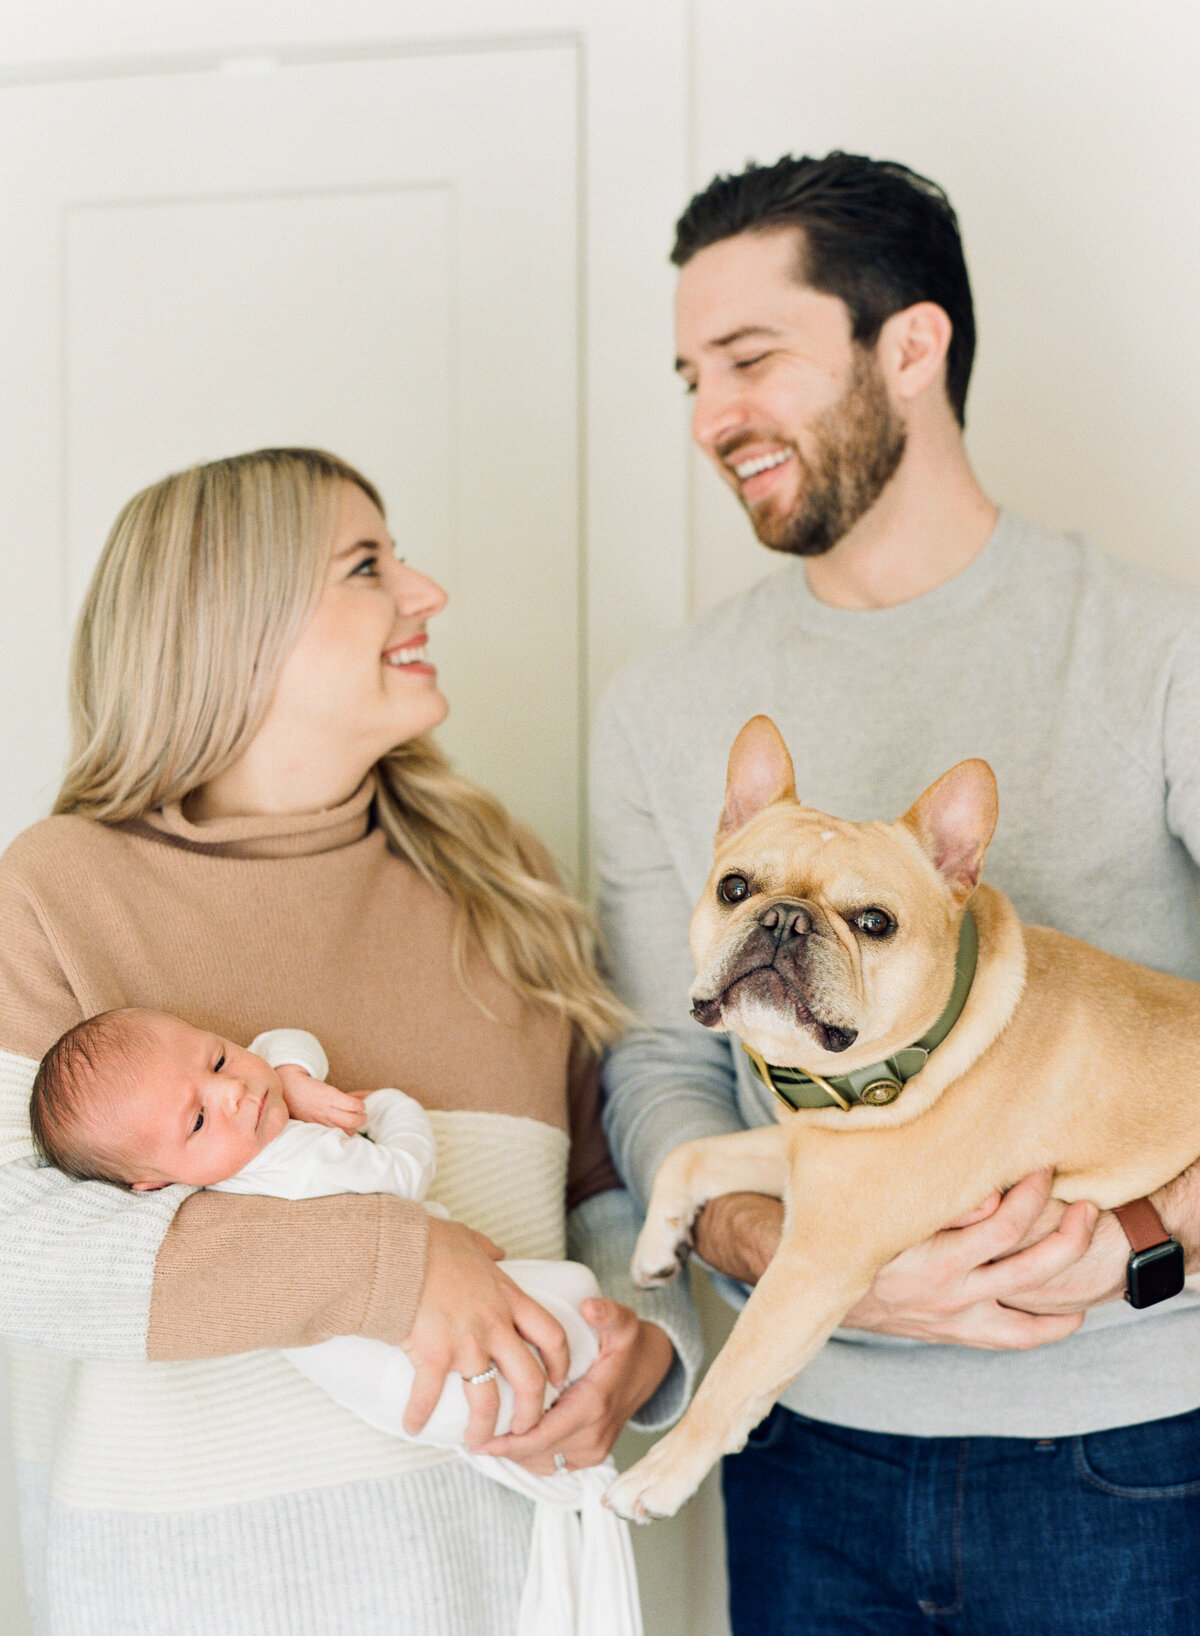 Mom holds newborn while Dad holds their dog for a family portrait during a Raleigh NC newborn session. Photo by Raleigh Newborn Photography A.J. Dunlap Photography.